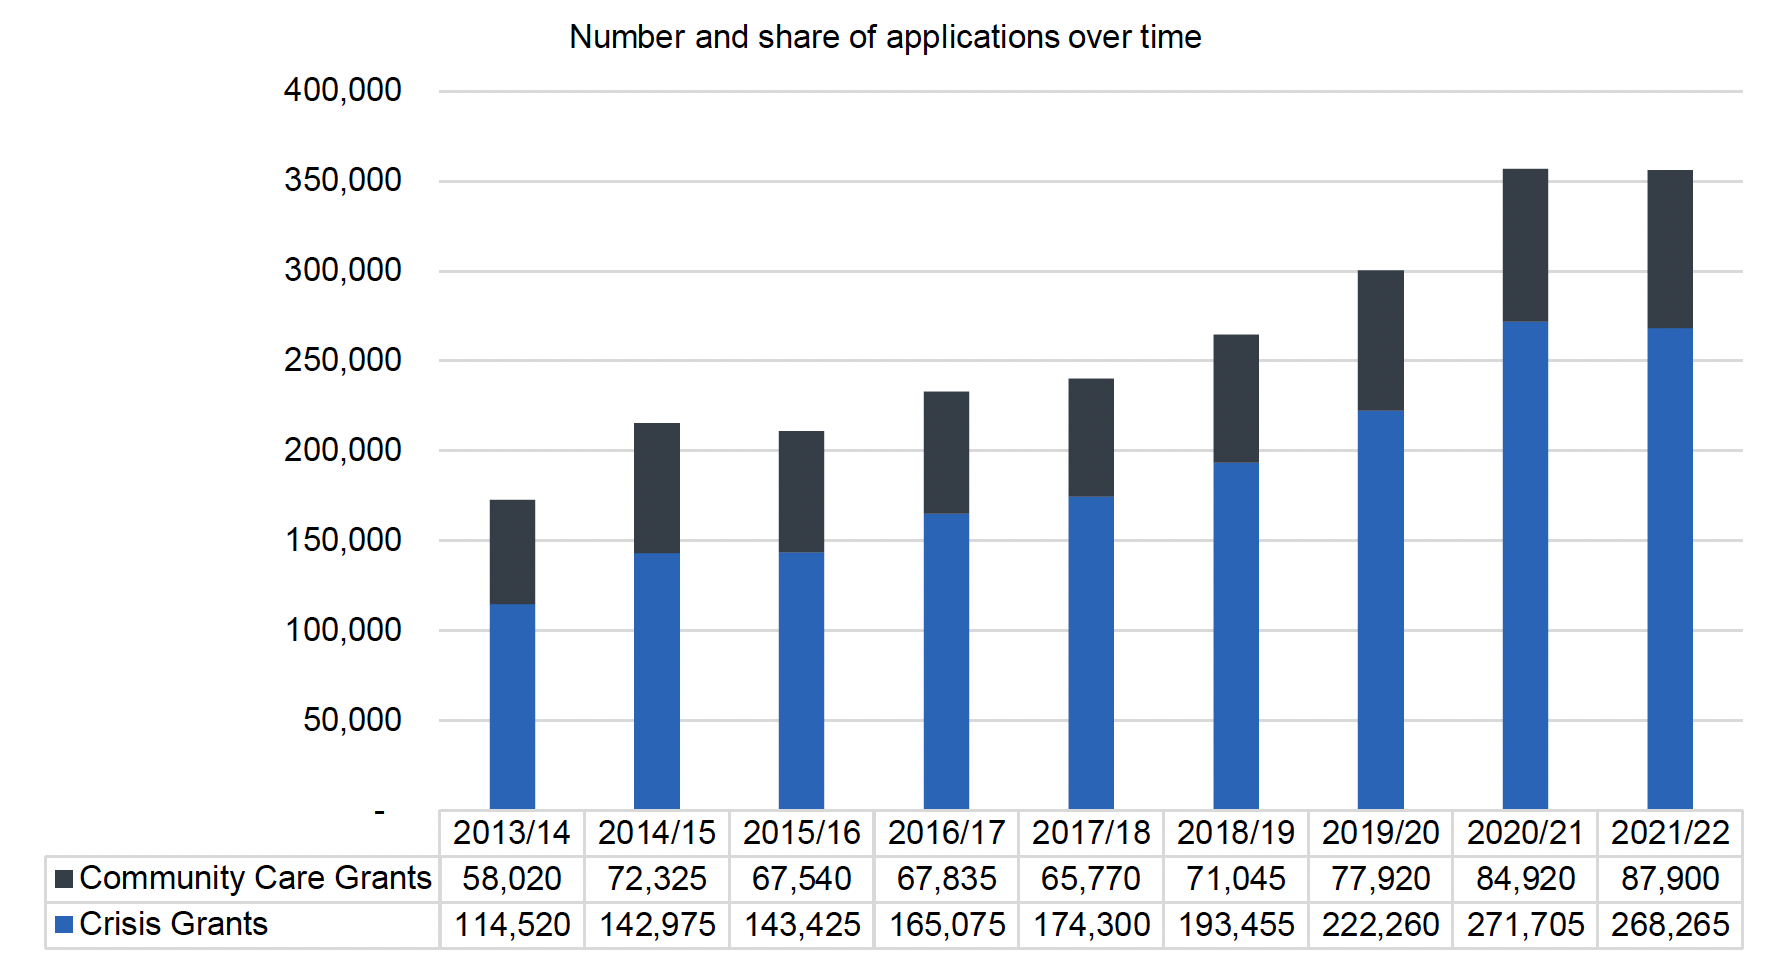 This figure shows a stacked bar graph of the number of both Crisis Grant and Community Care Grant applications over time, from 2013/14 to 2021/22. The main patterns are described in the text.